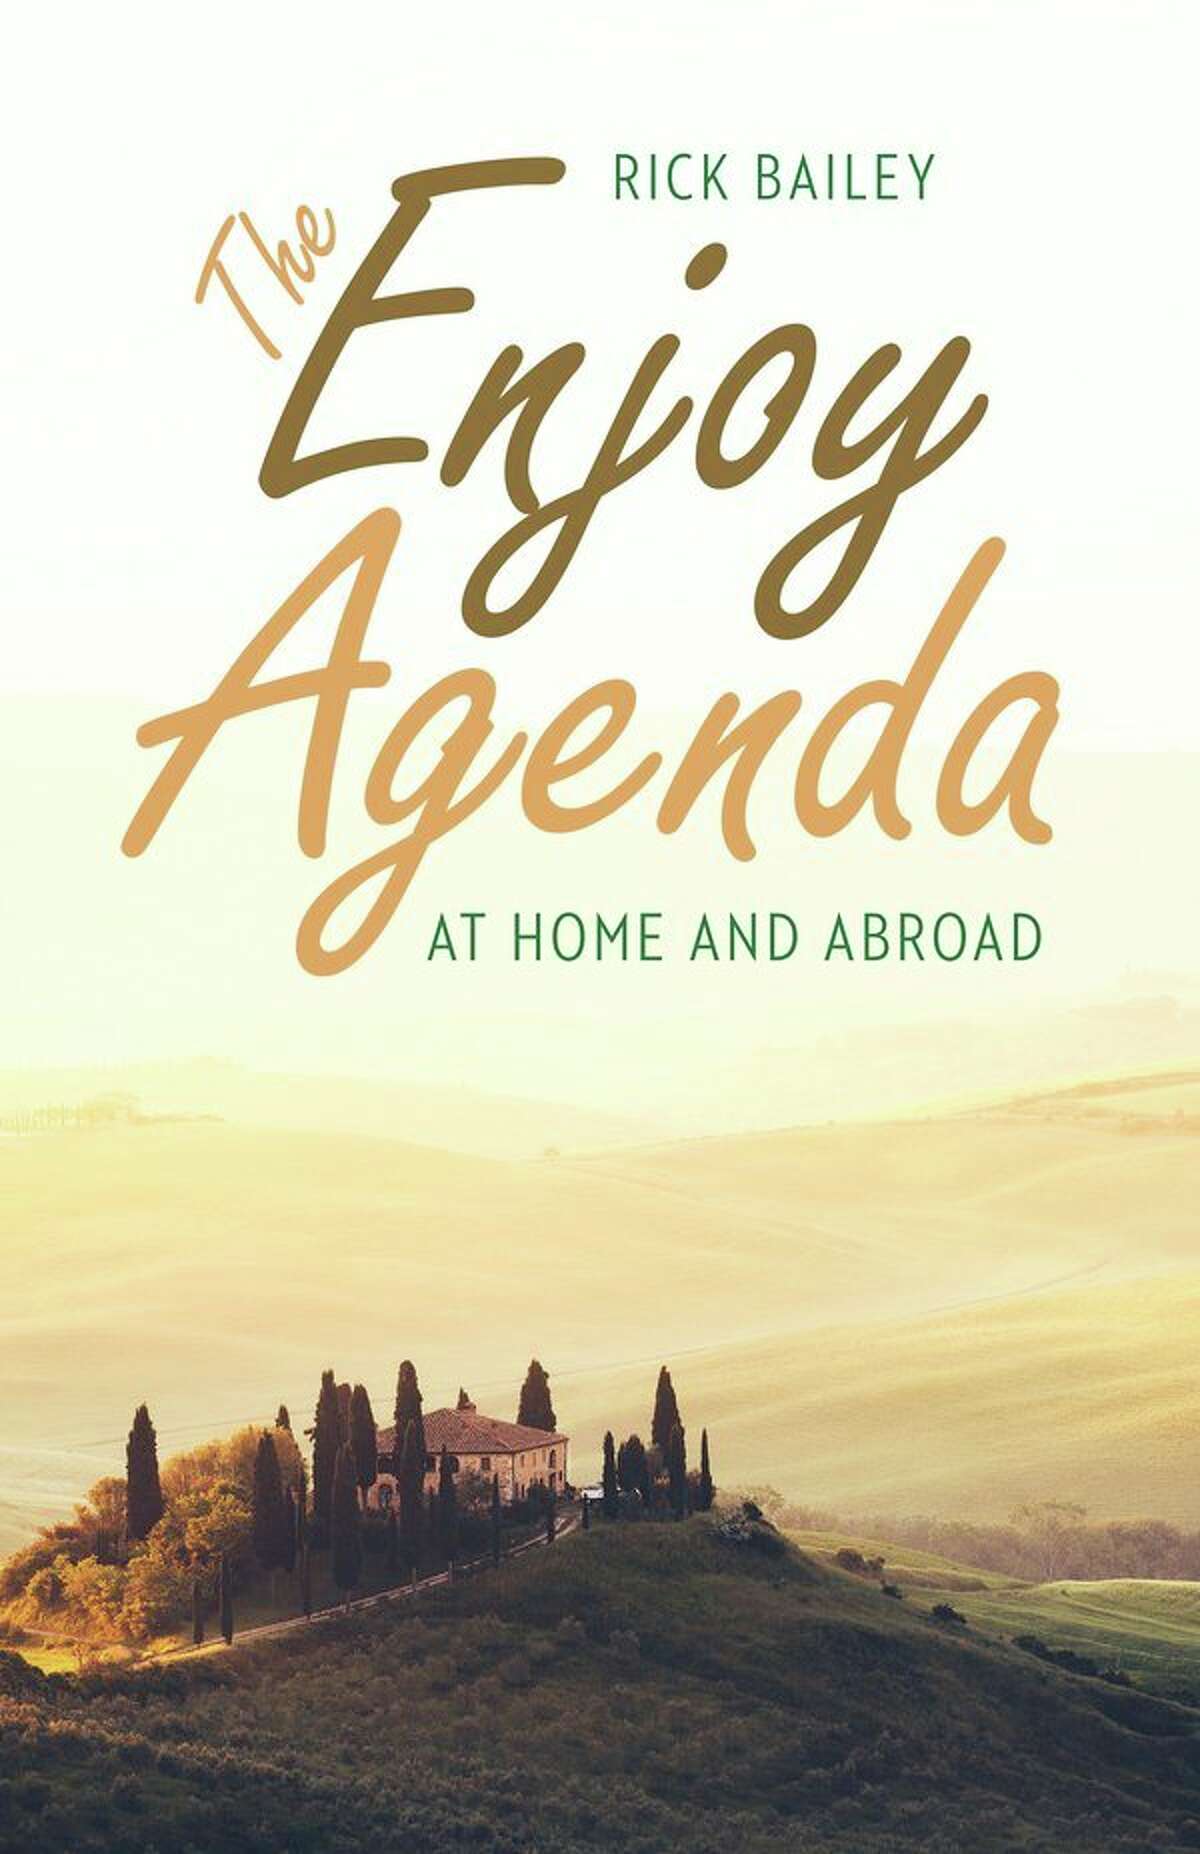 Rick Bailey's newest book, 'The Enjoy Agenda: At Home and Abroad' will be available April 1. (Photo provided)